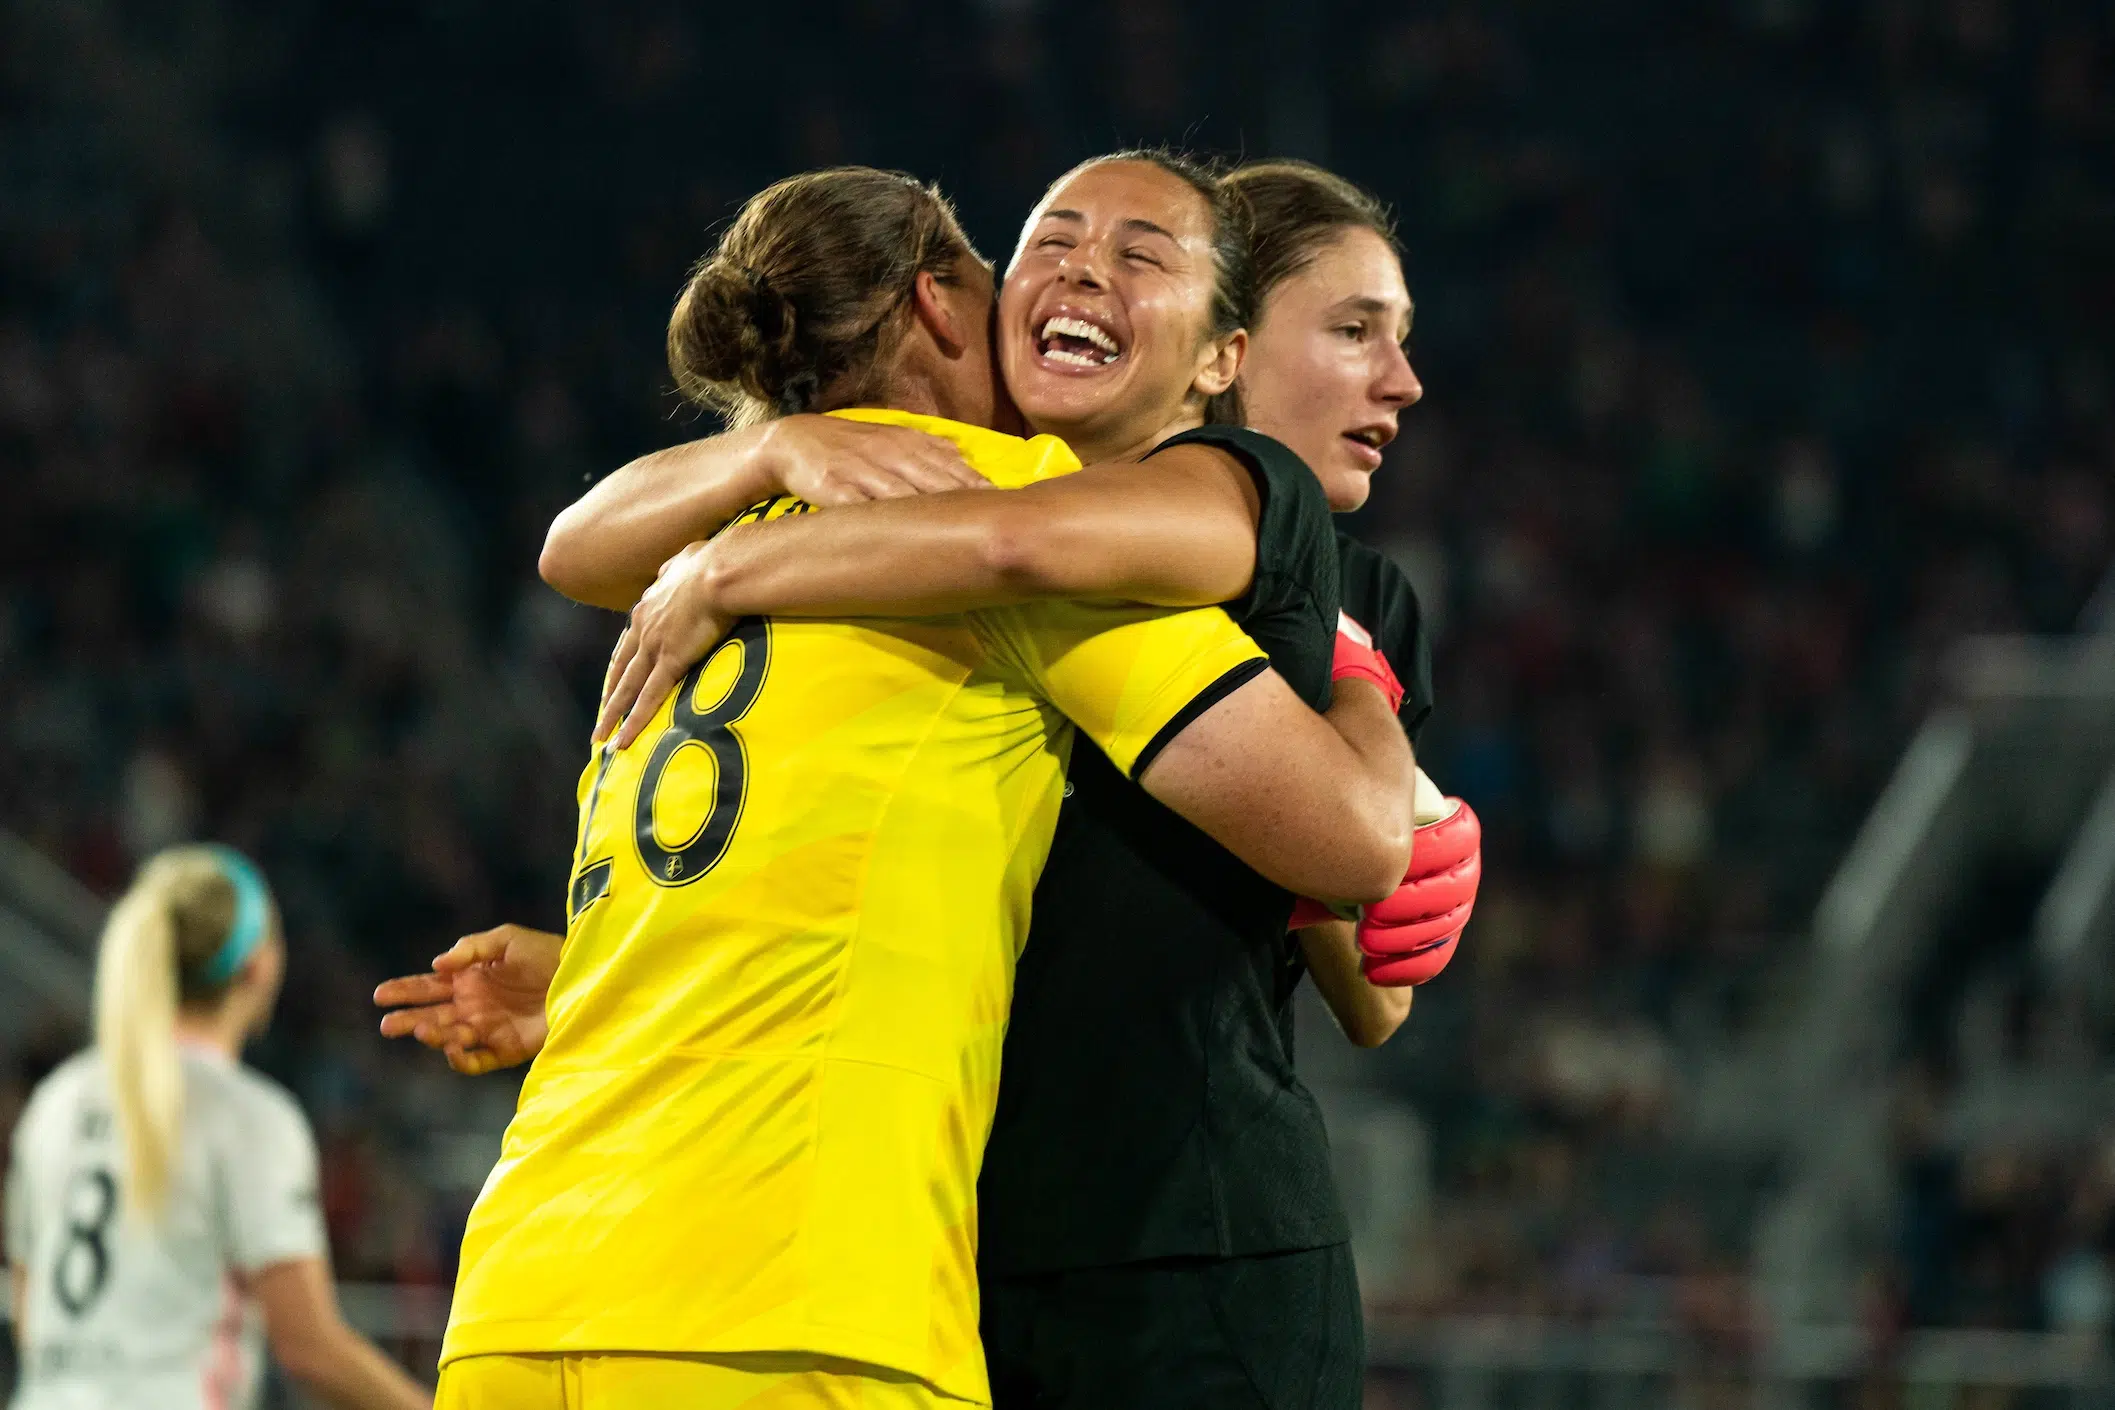 Nicole Barnhart in a yellow jersey and Sam Staab in a black jersey hug and smile.